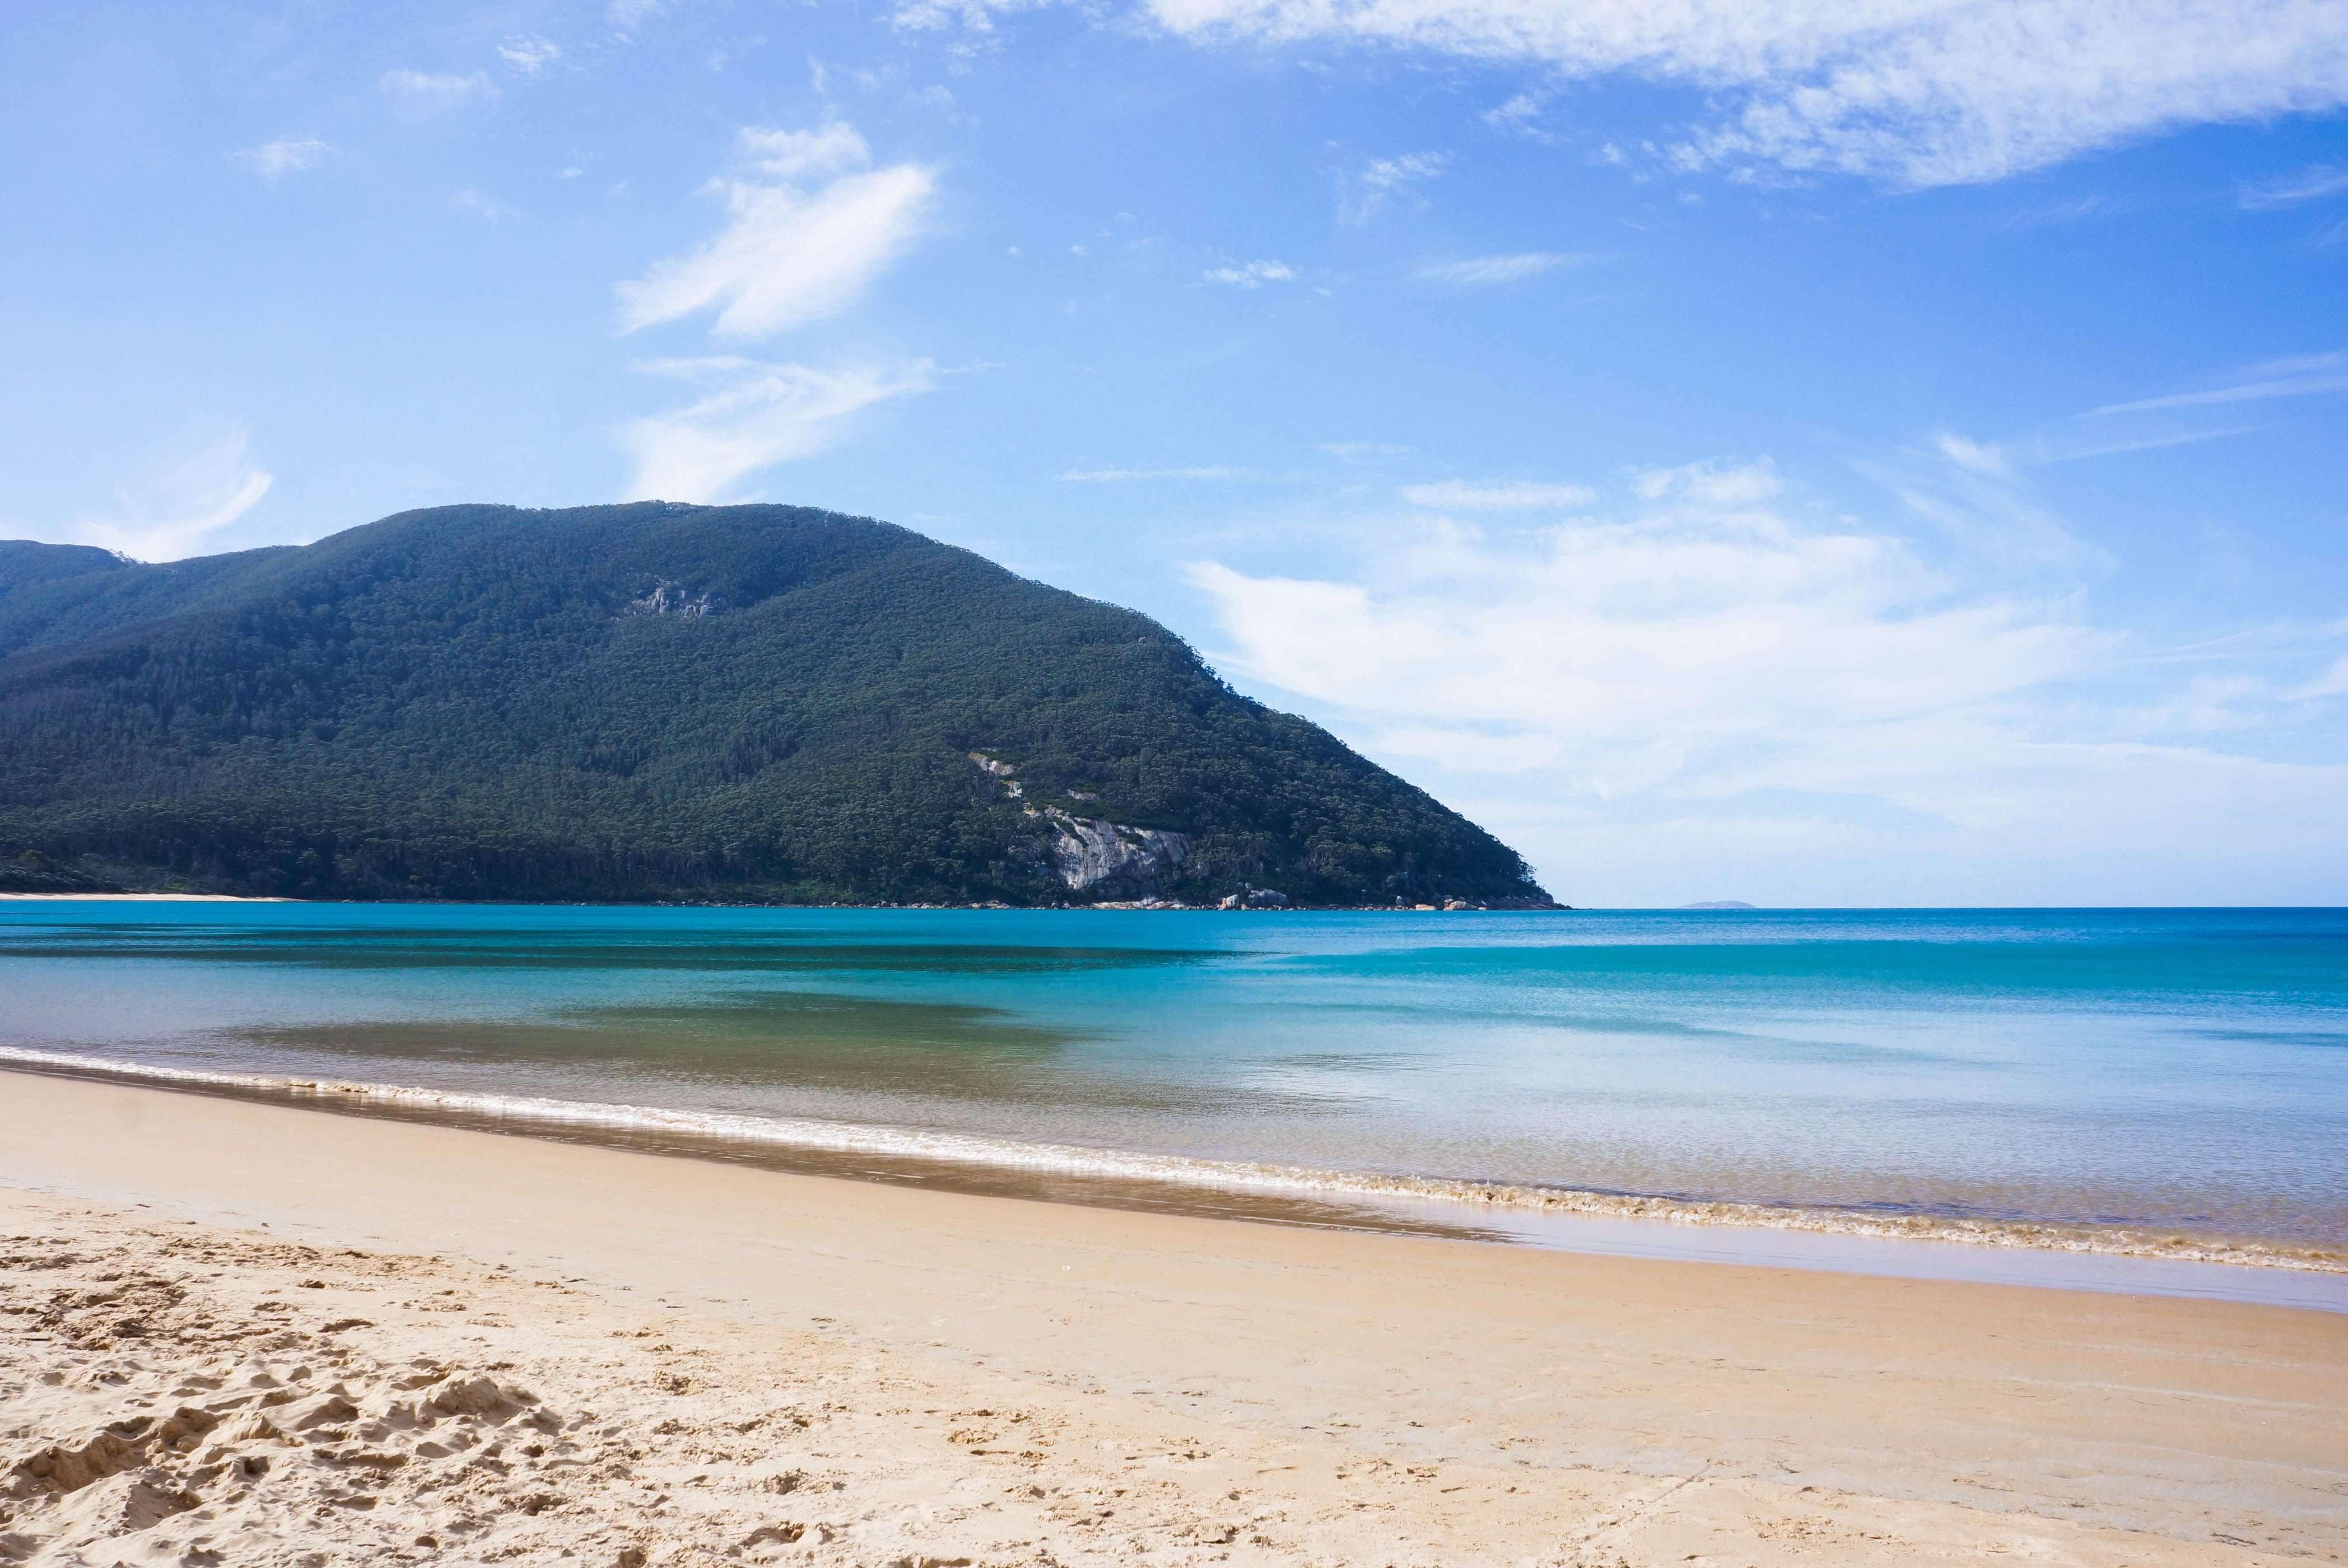 sealers cove, sealers cove hike, sealers cove wilsons promontory, sealers cove campground, sealers cover history